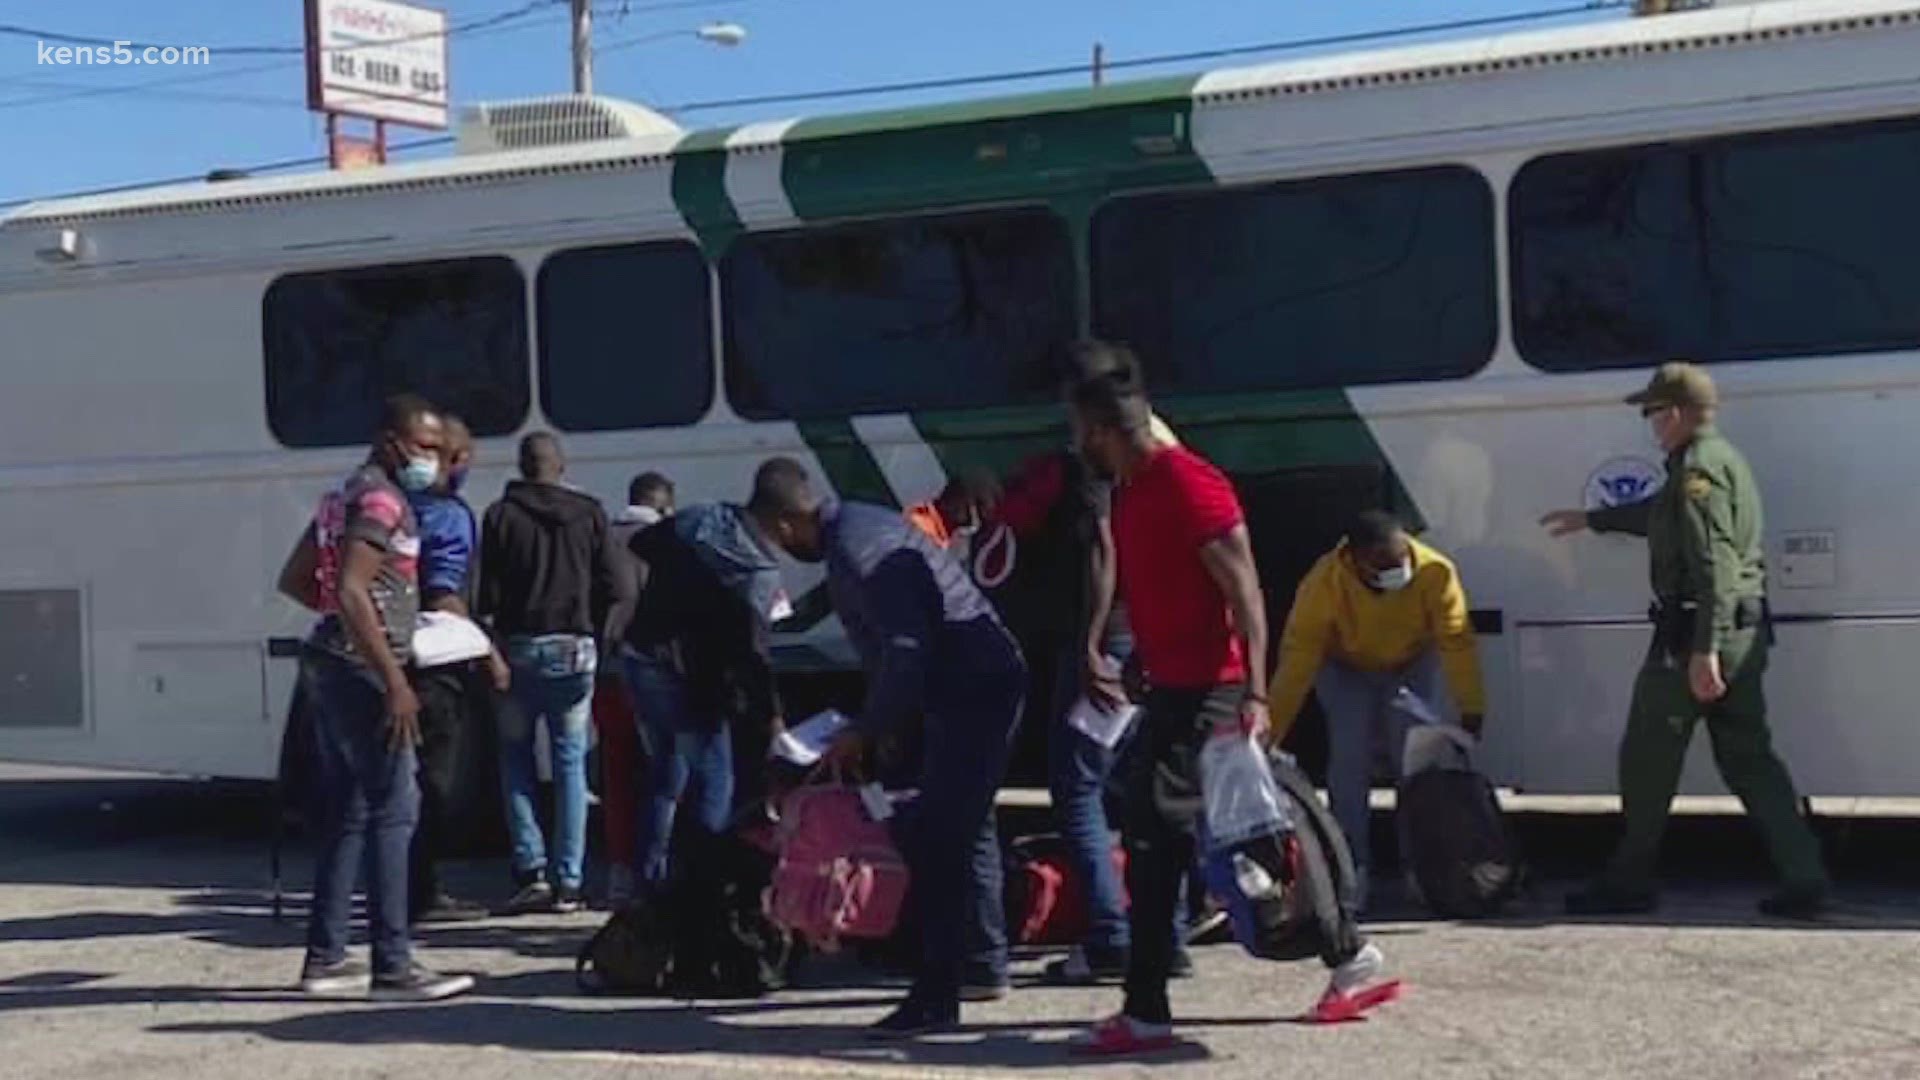 Border Patrol officials say they observed a 650% increase in Haitian migrants coming to the U.S. in January, compared to the year prior.